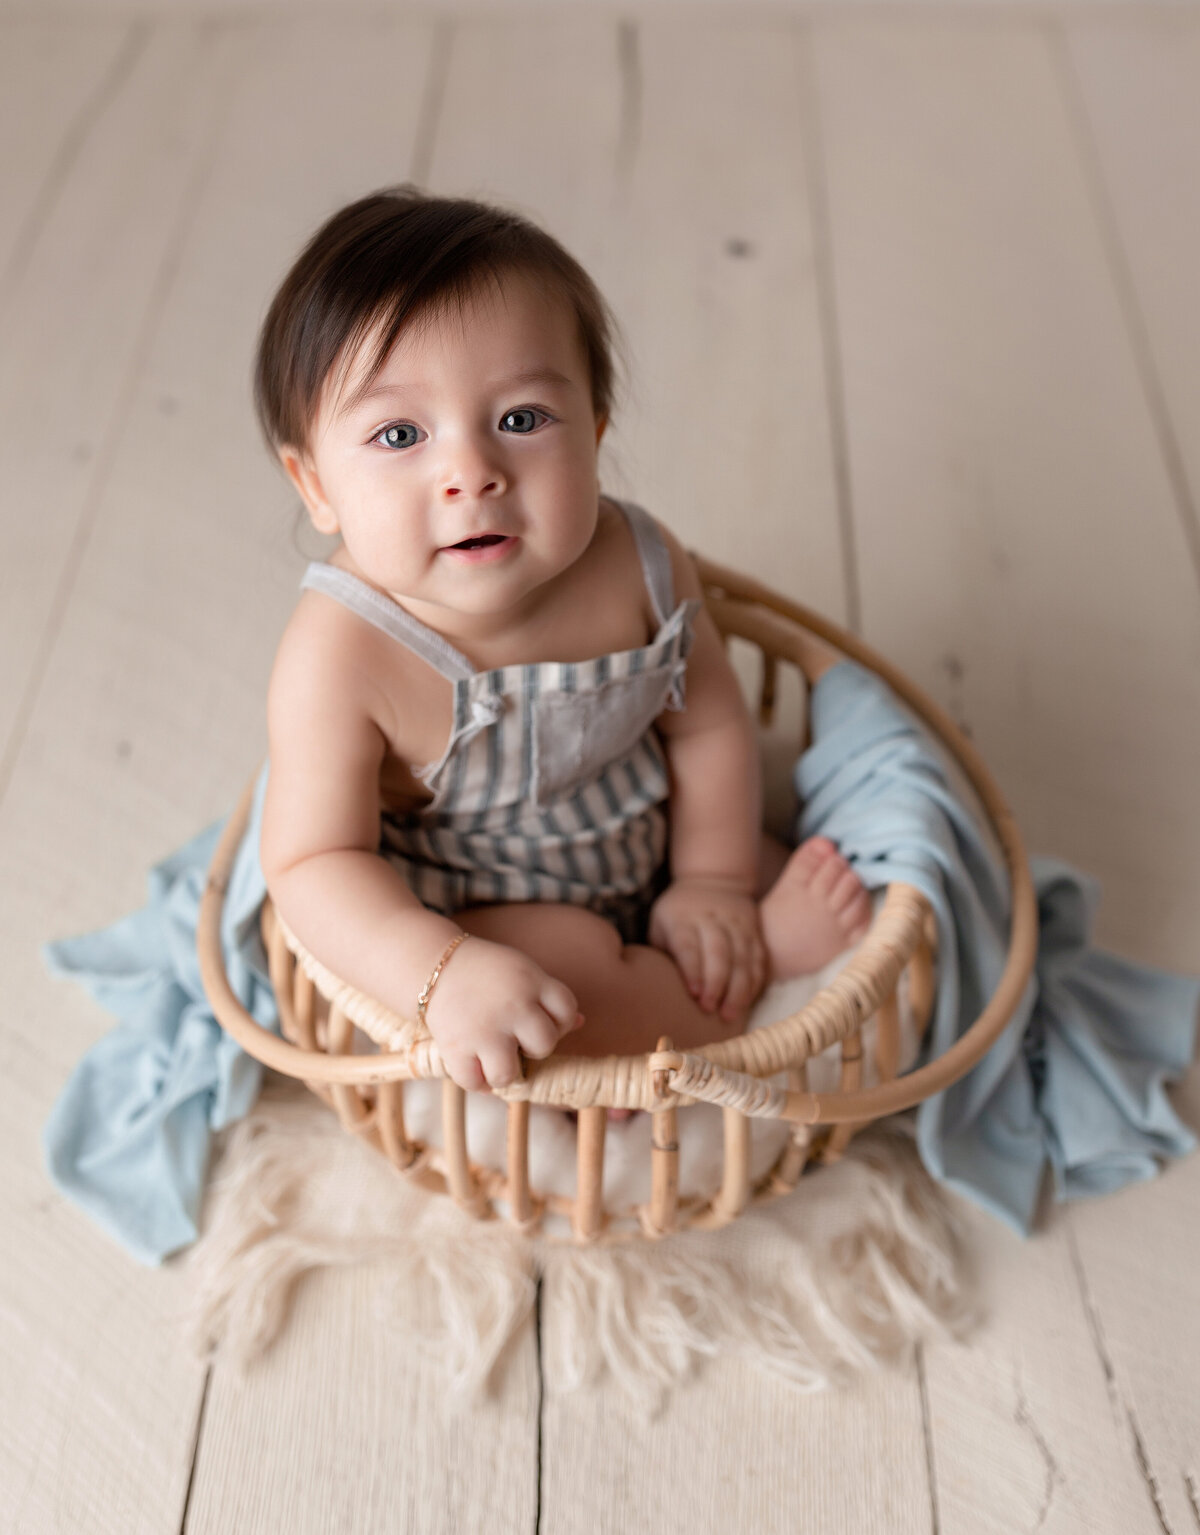 Baby boy sitting in a rattan basket for 6-month milestone photography session at West Palm Beach photography studio. Baby is looking up at the camera with dark brown hair. Baby is wearing striped short overalls. Basket is on painted barn board floors.